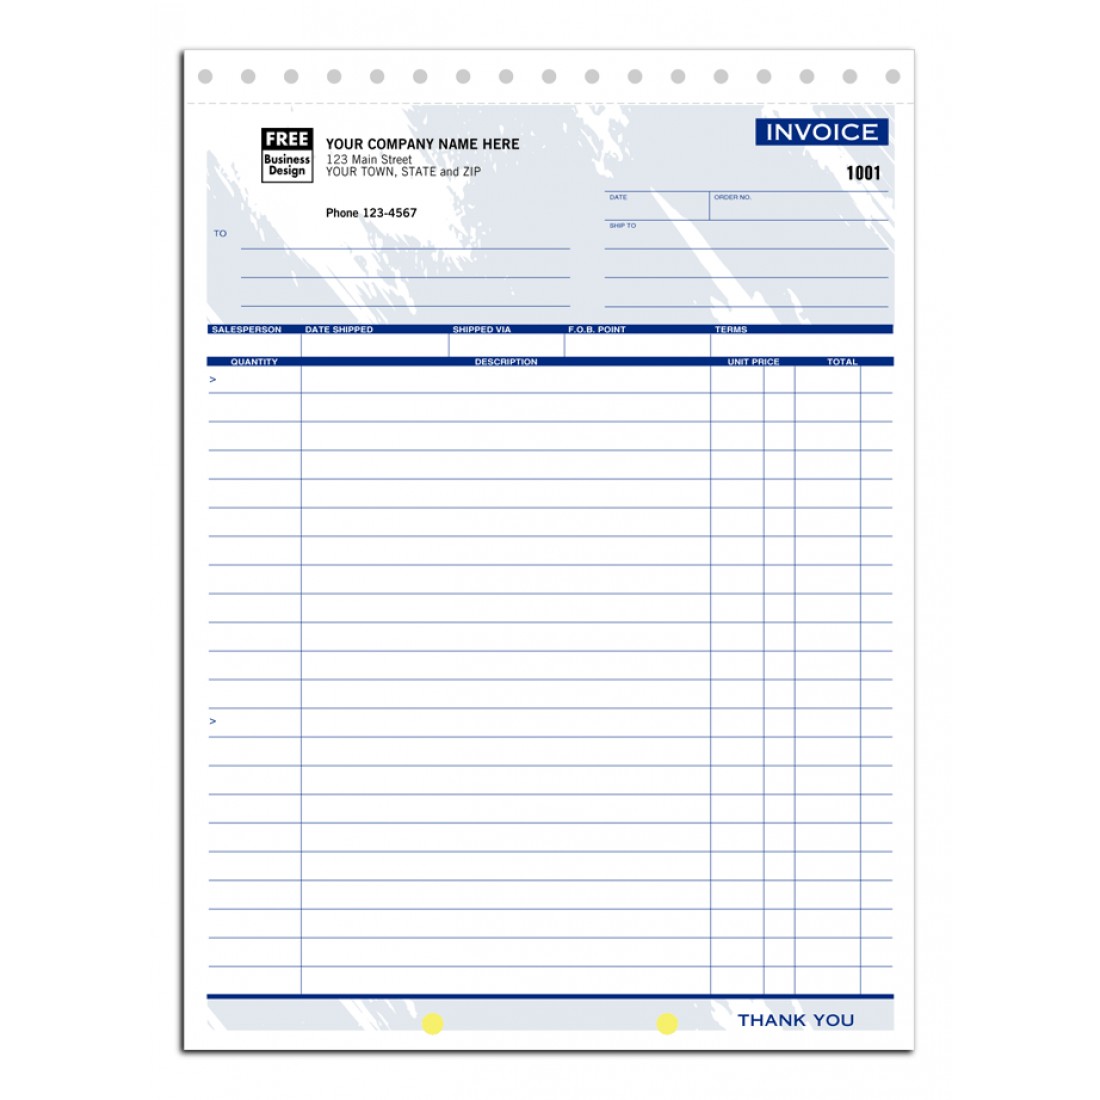 paper format jpg graph Invoice  Shipping Free Forms  Business